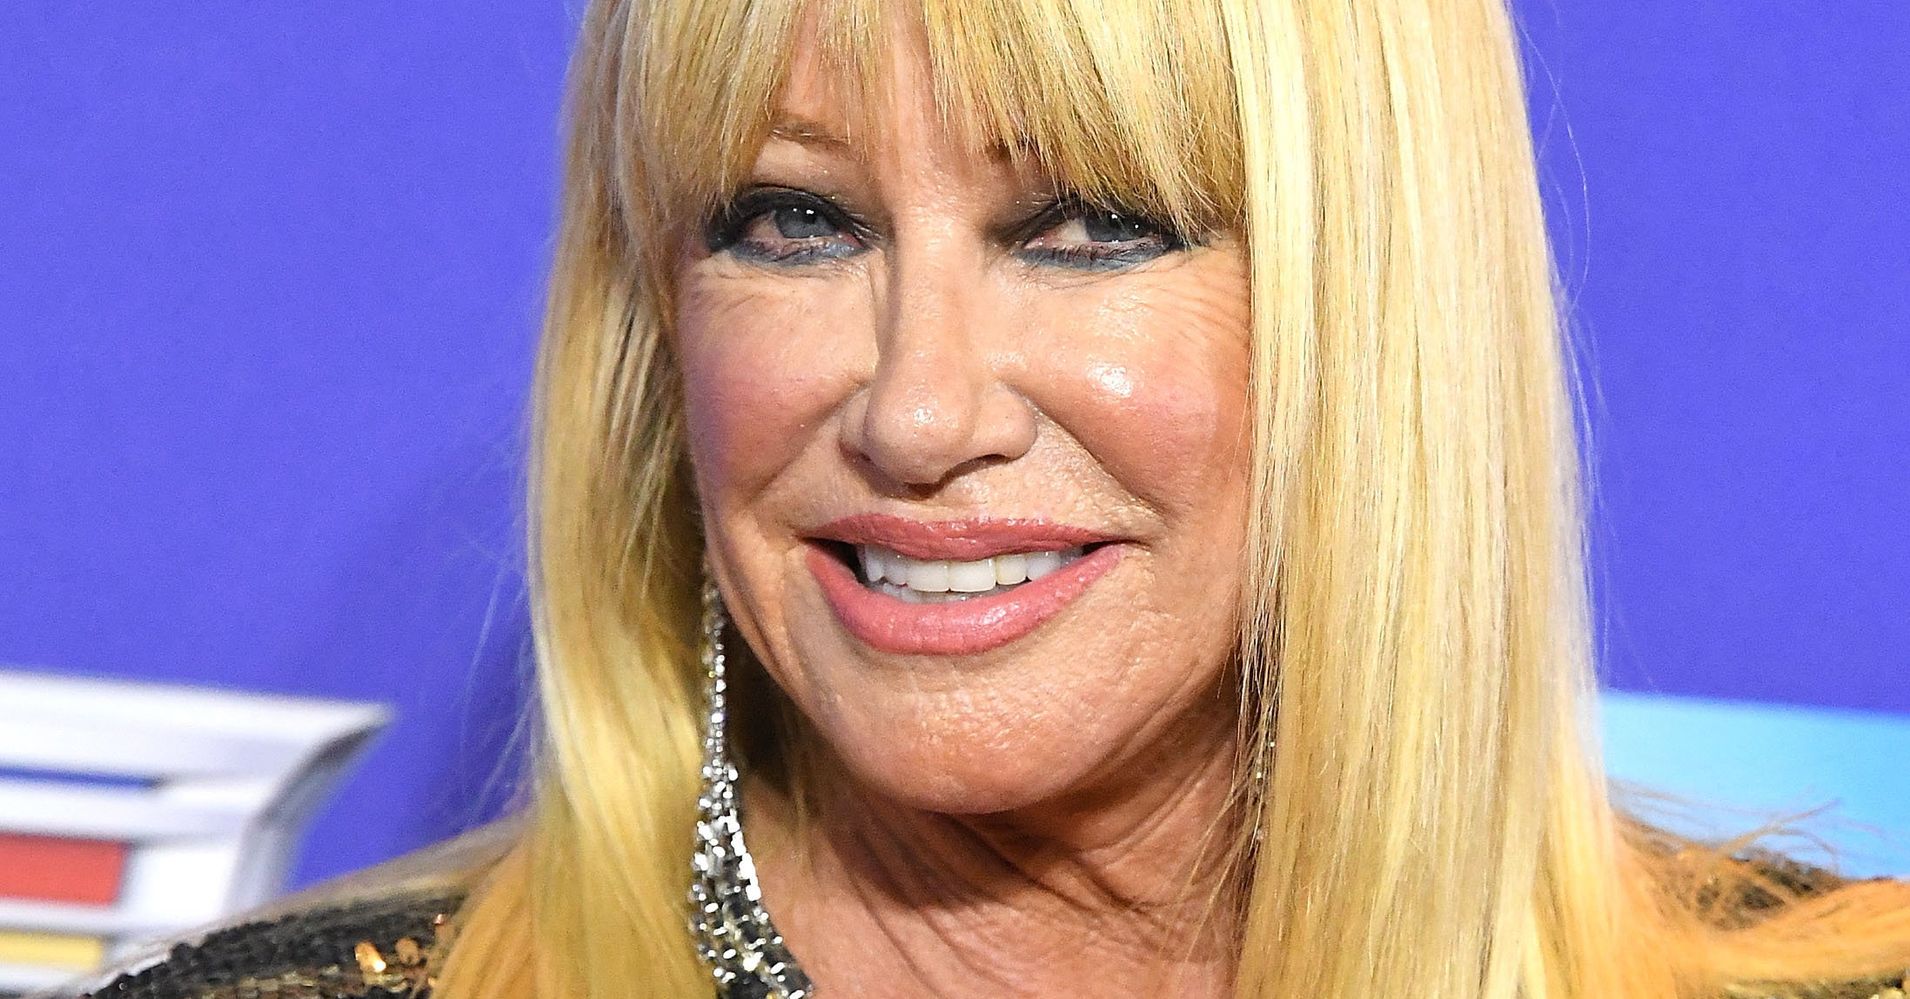 Suzanne Somers Suzanne Somers Breast Cancer And Phototherapy Part I He Barely Had Any